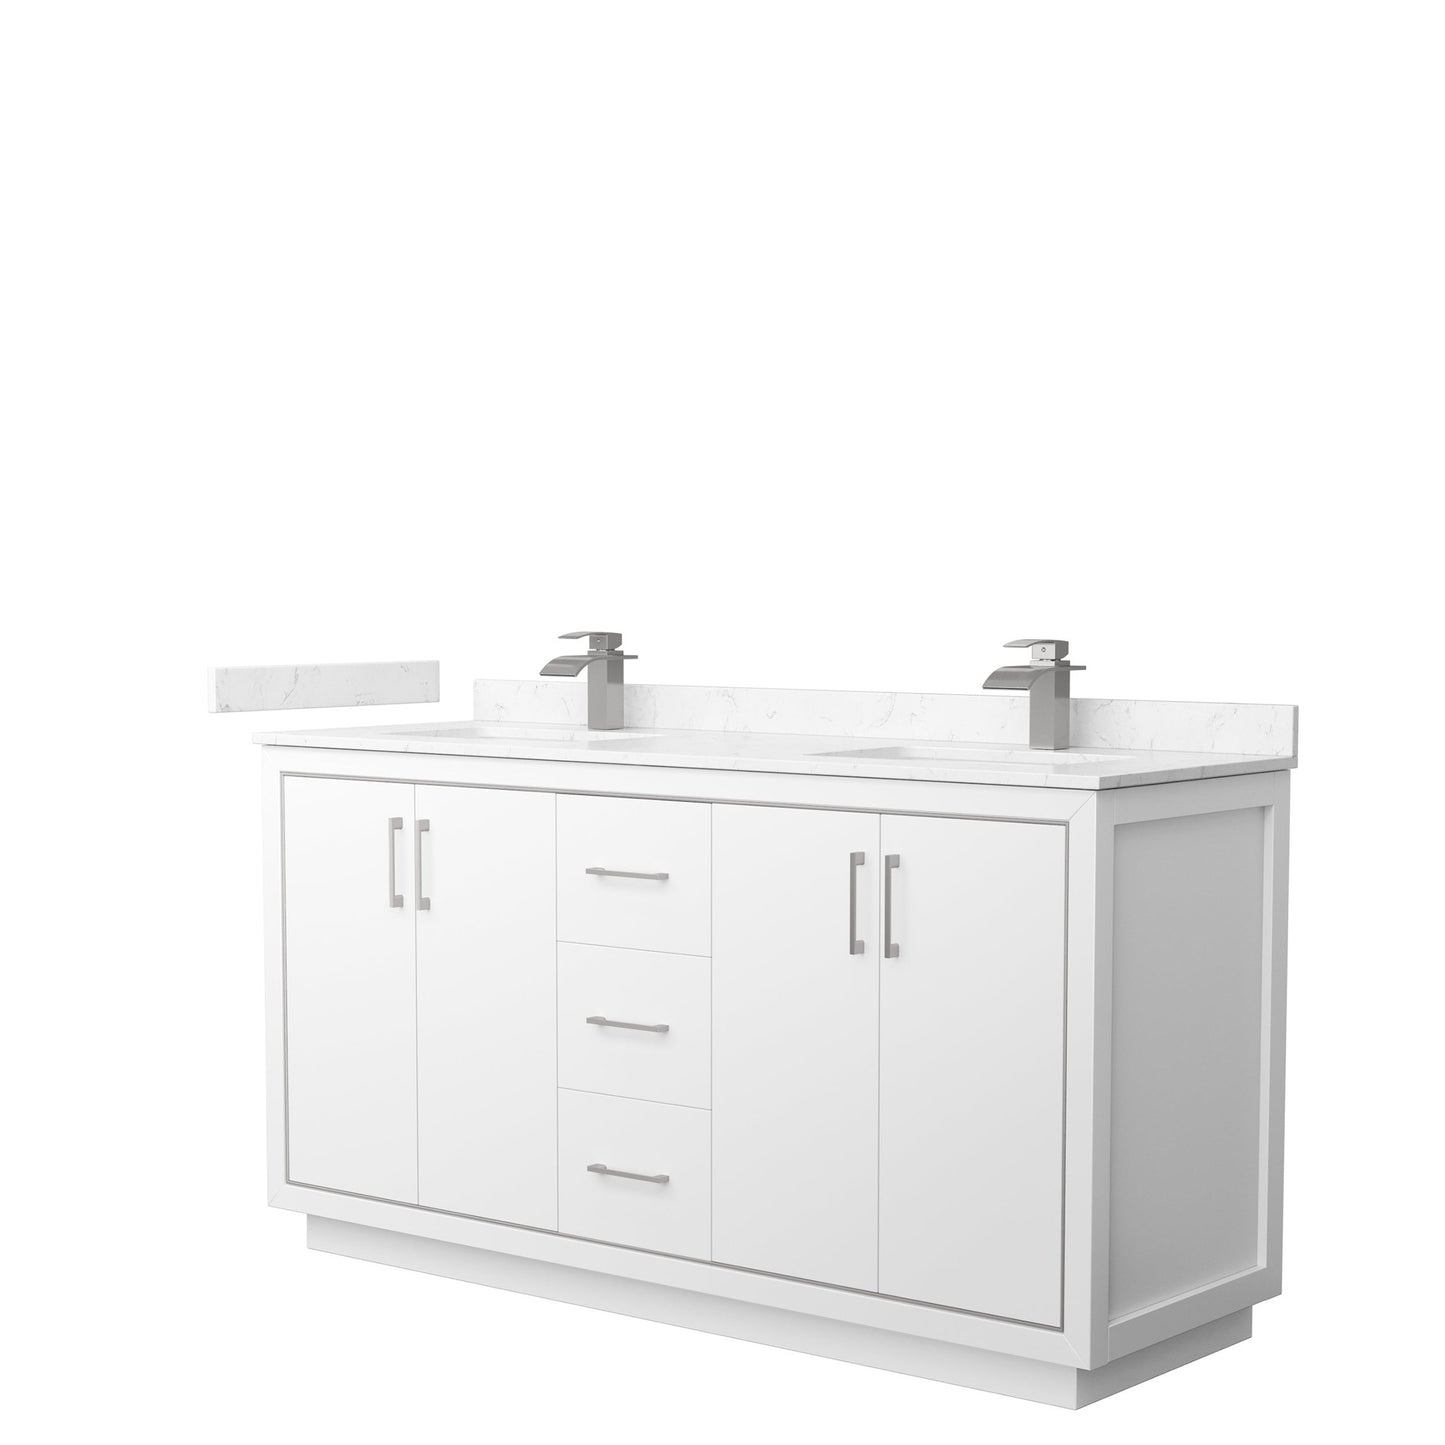 Wyndham Collection Icon 66" Double Bathroom Vanity in White, Carrara Cultured Marble Countertop, Undermount Square Sinks, Brushed Nickel Trim